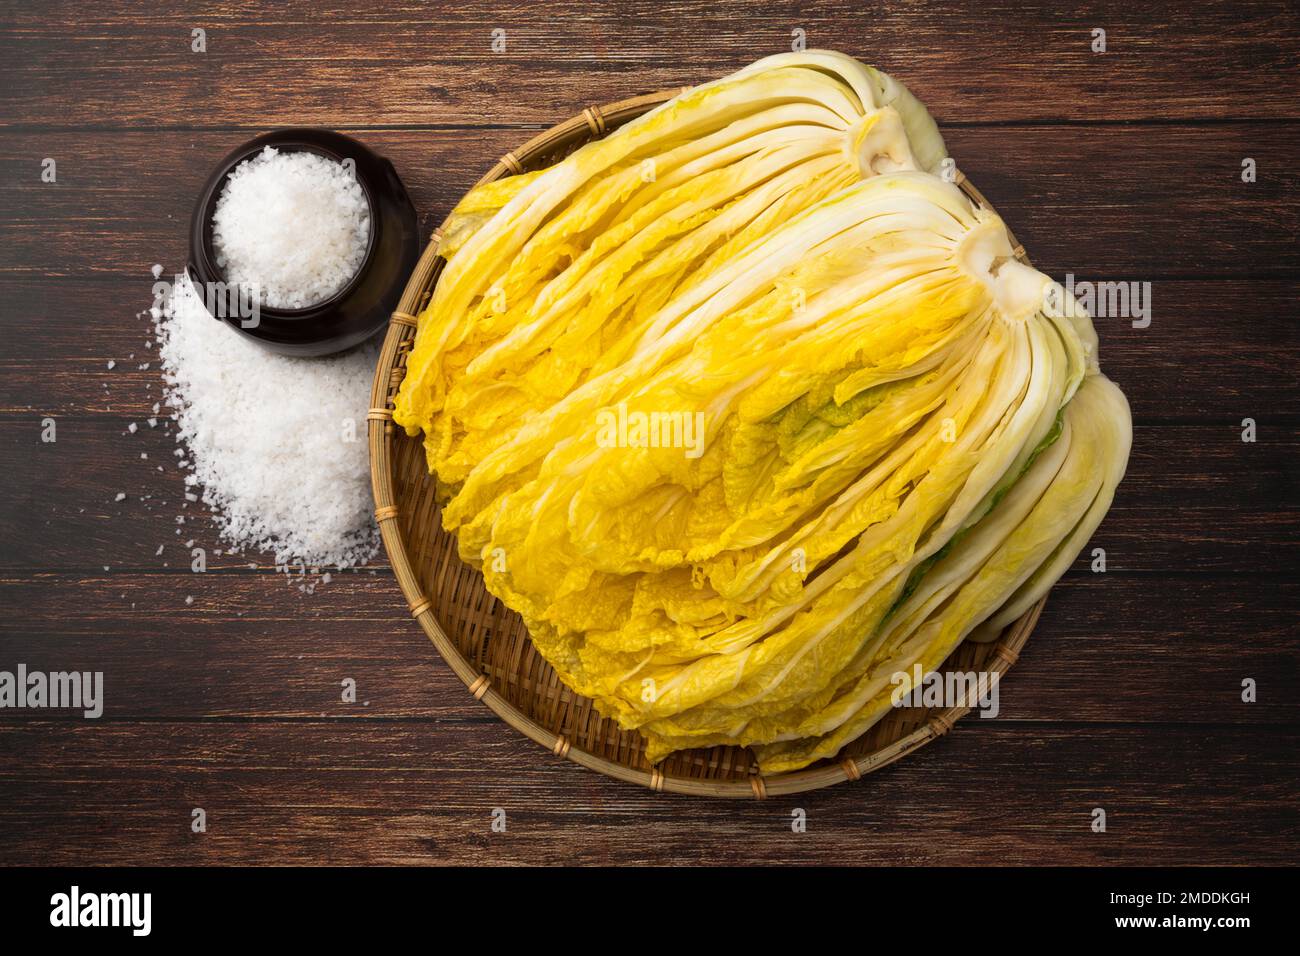 Kimchi Cabbage. Korean traditional way, salted cabbage. Wood deck background, closeup viewed from above. Stock Photo